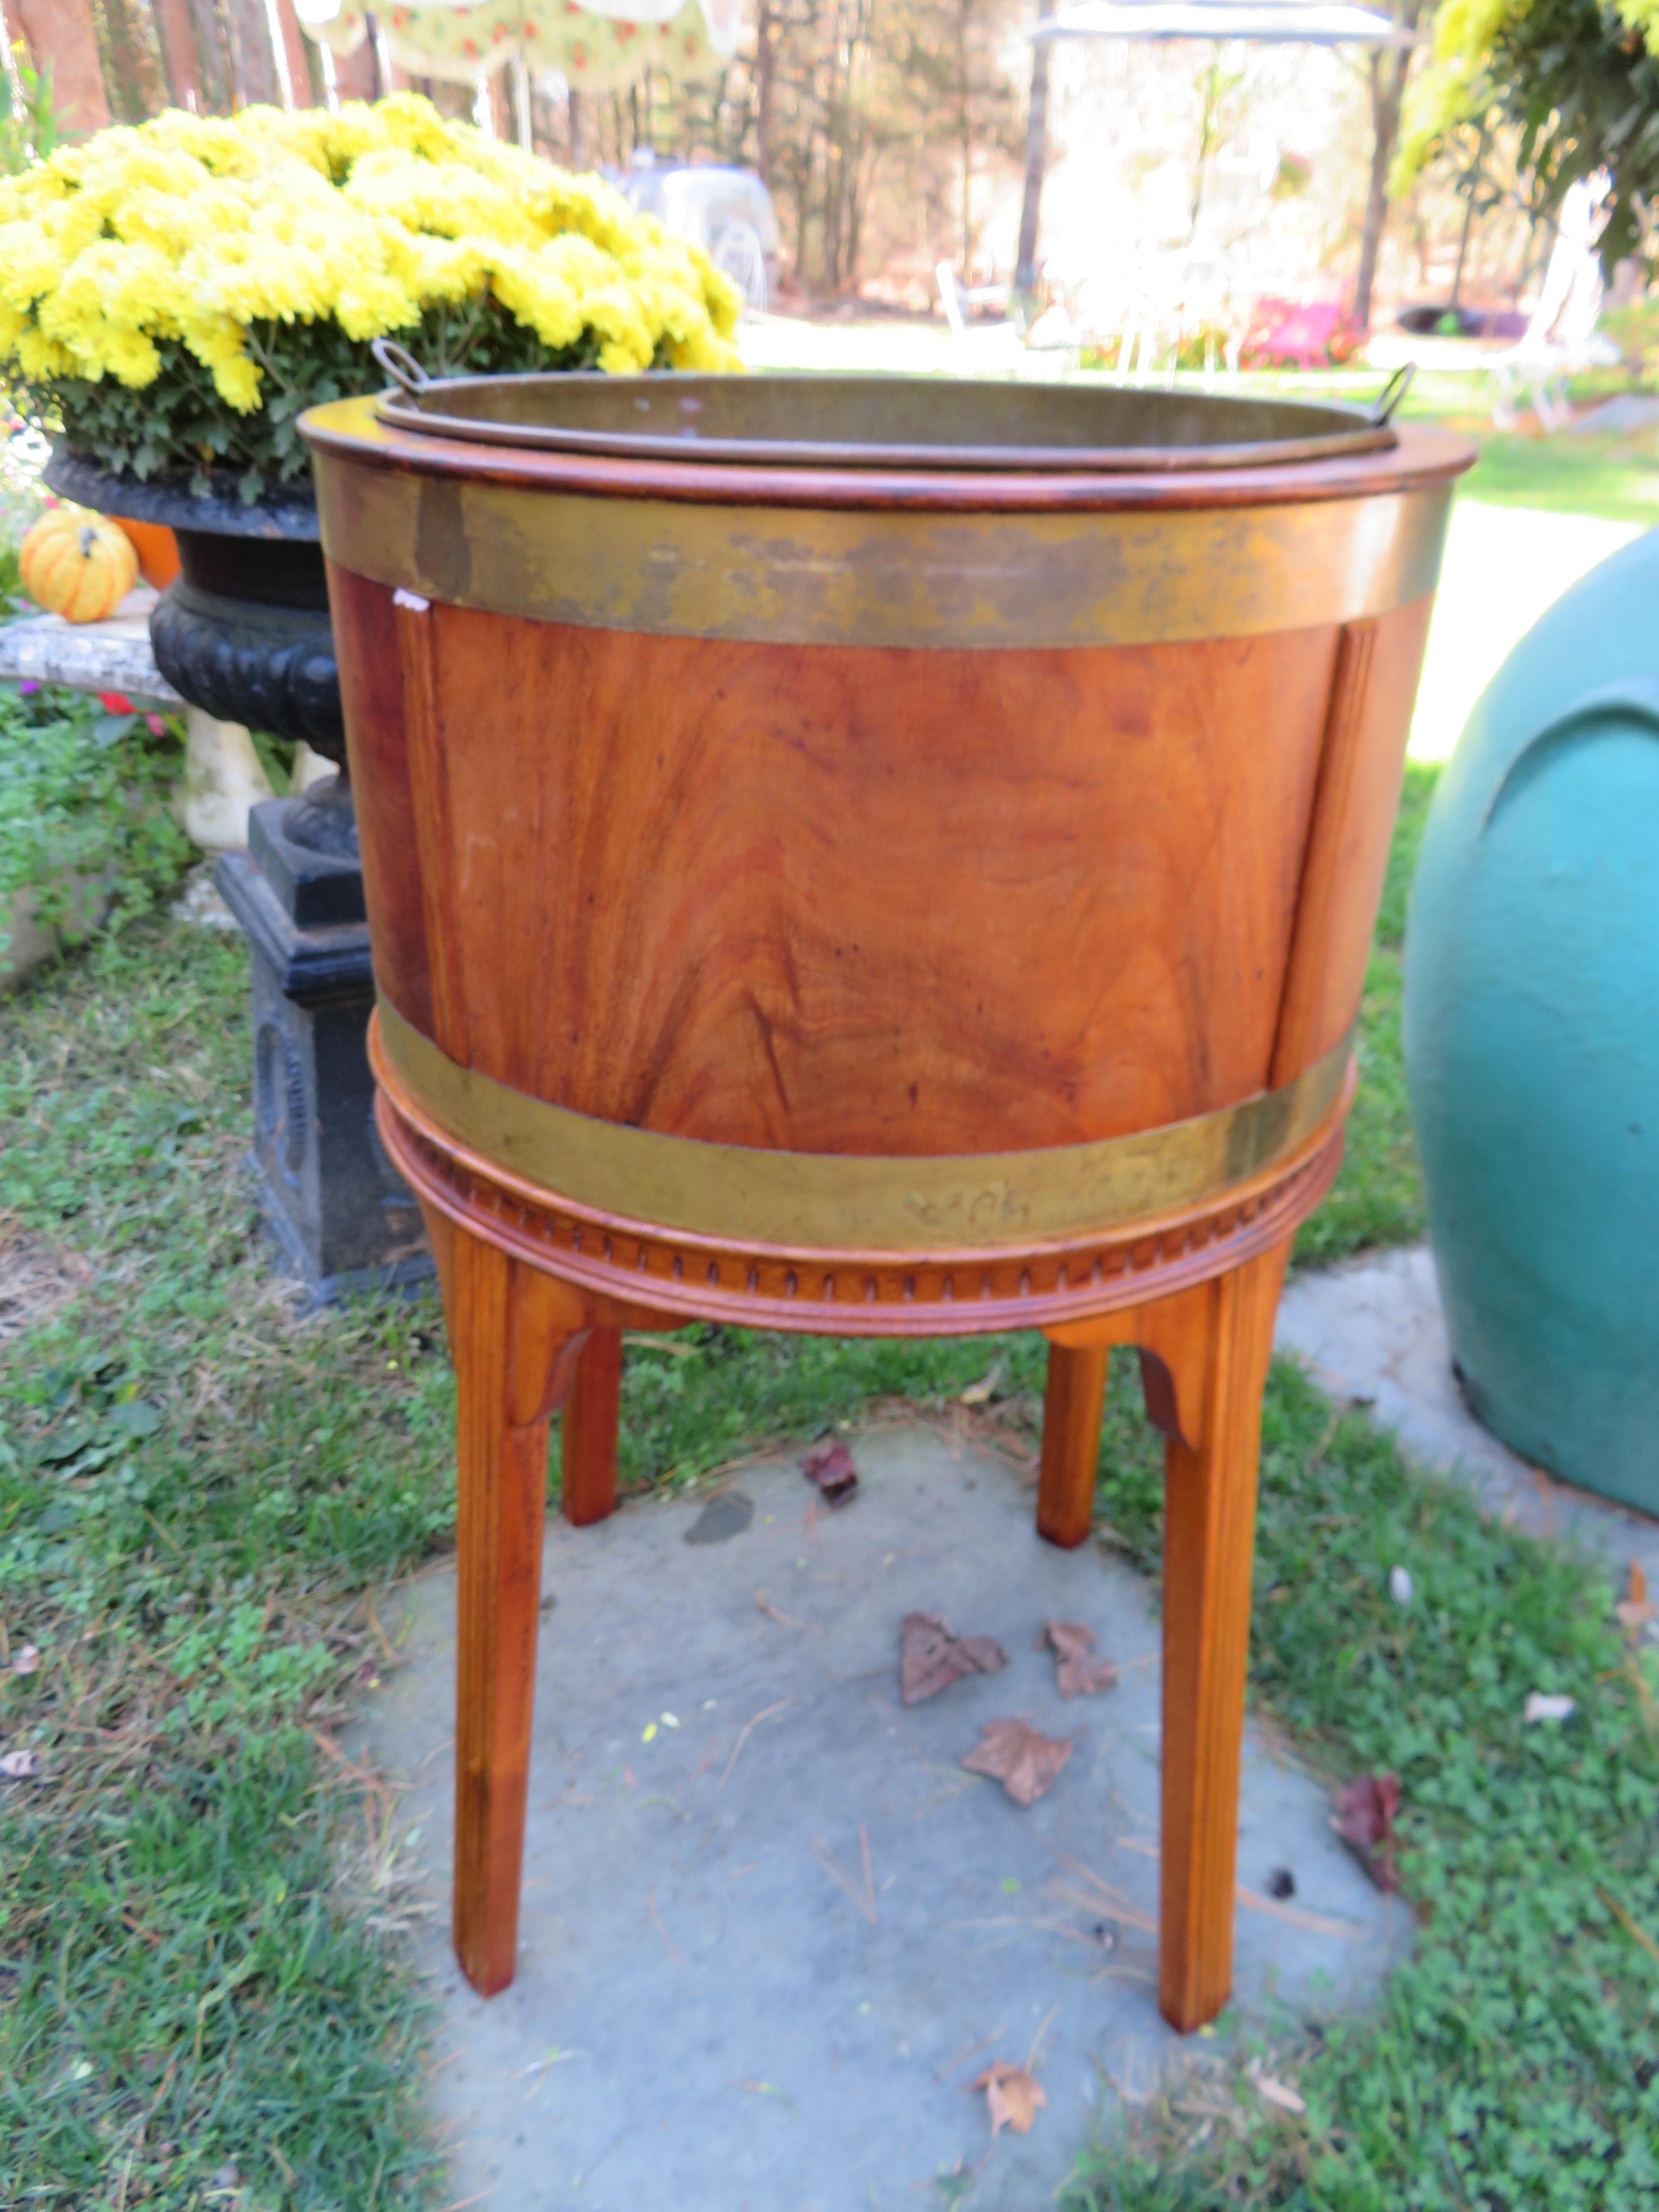 George lll style Mahogany open wine cooler, planter. This handsome brass-bound, circular wine cooler has its original brass insert. It measures 32